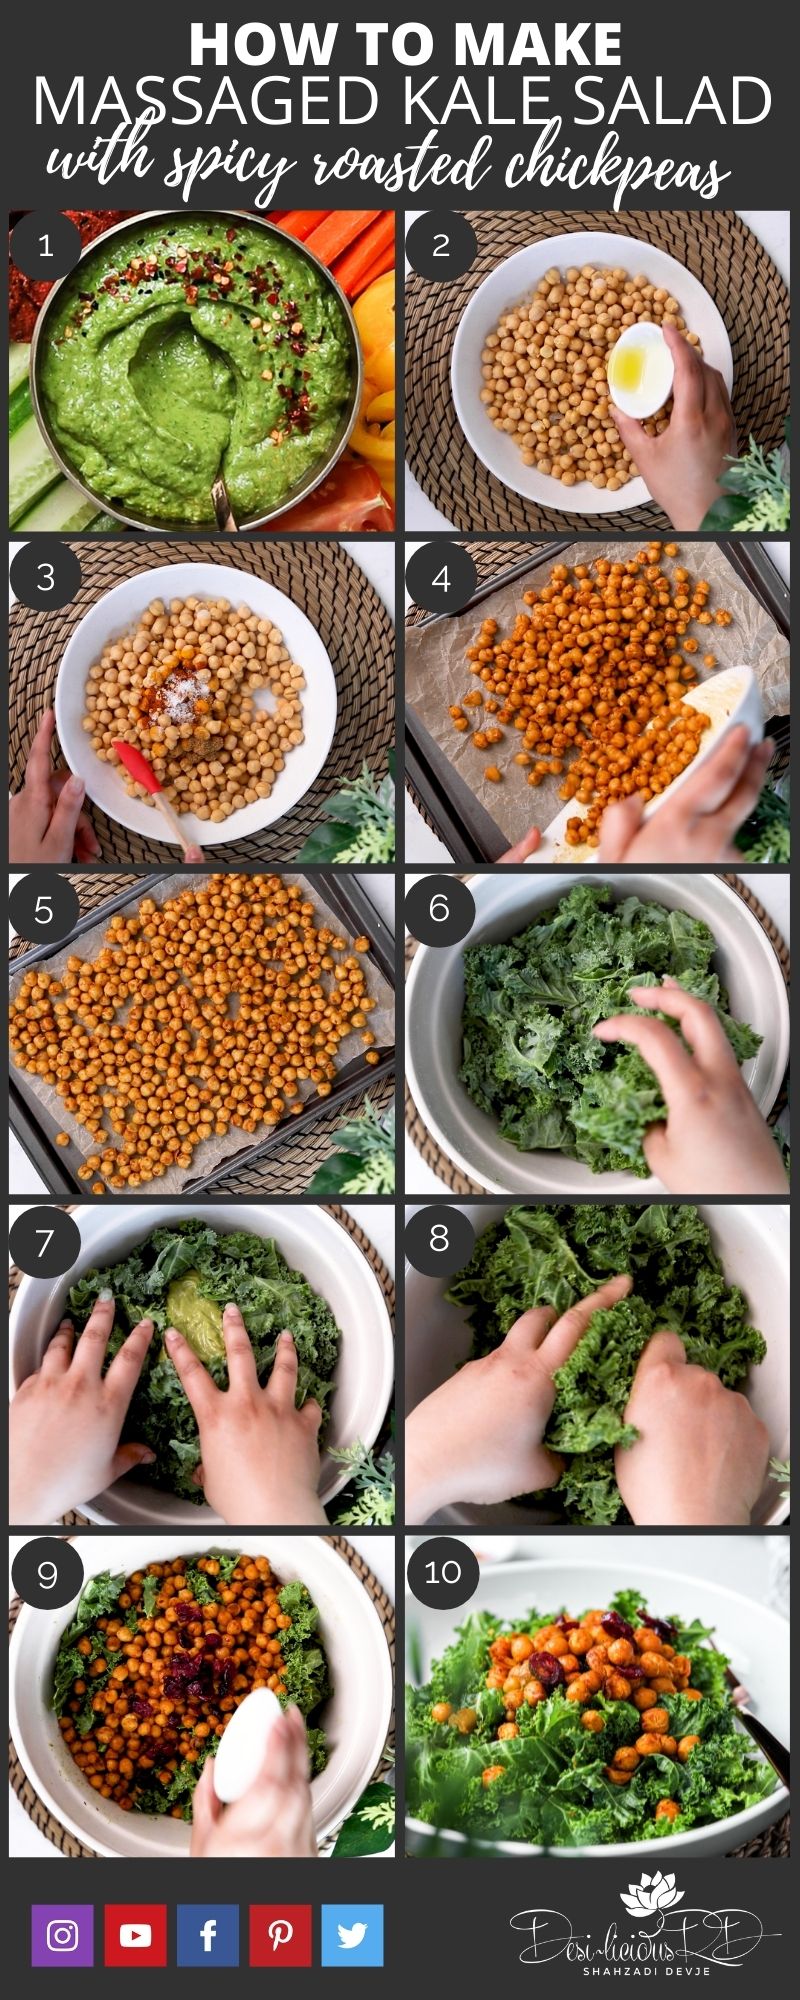 step by step preparation shots of how to make kale salad with spicy roasted chickpeas.